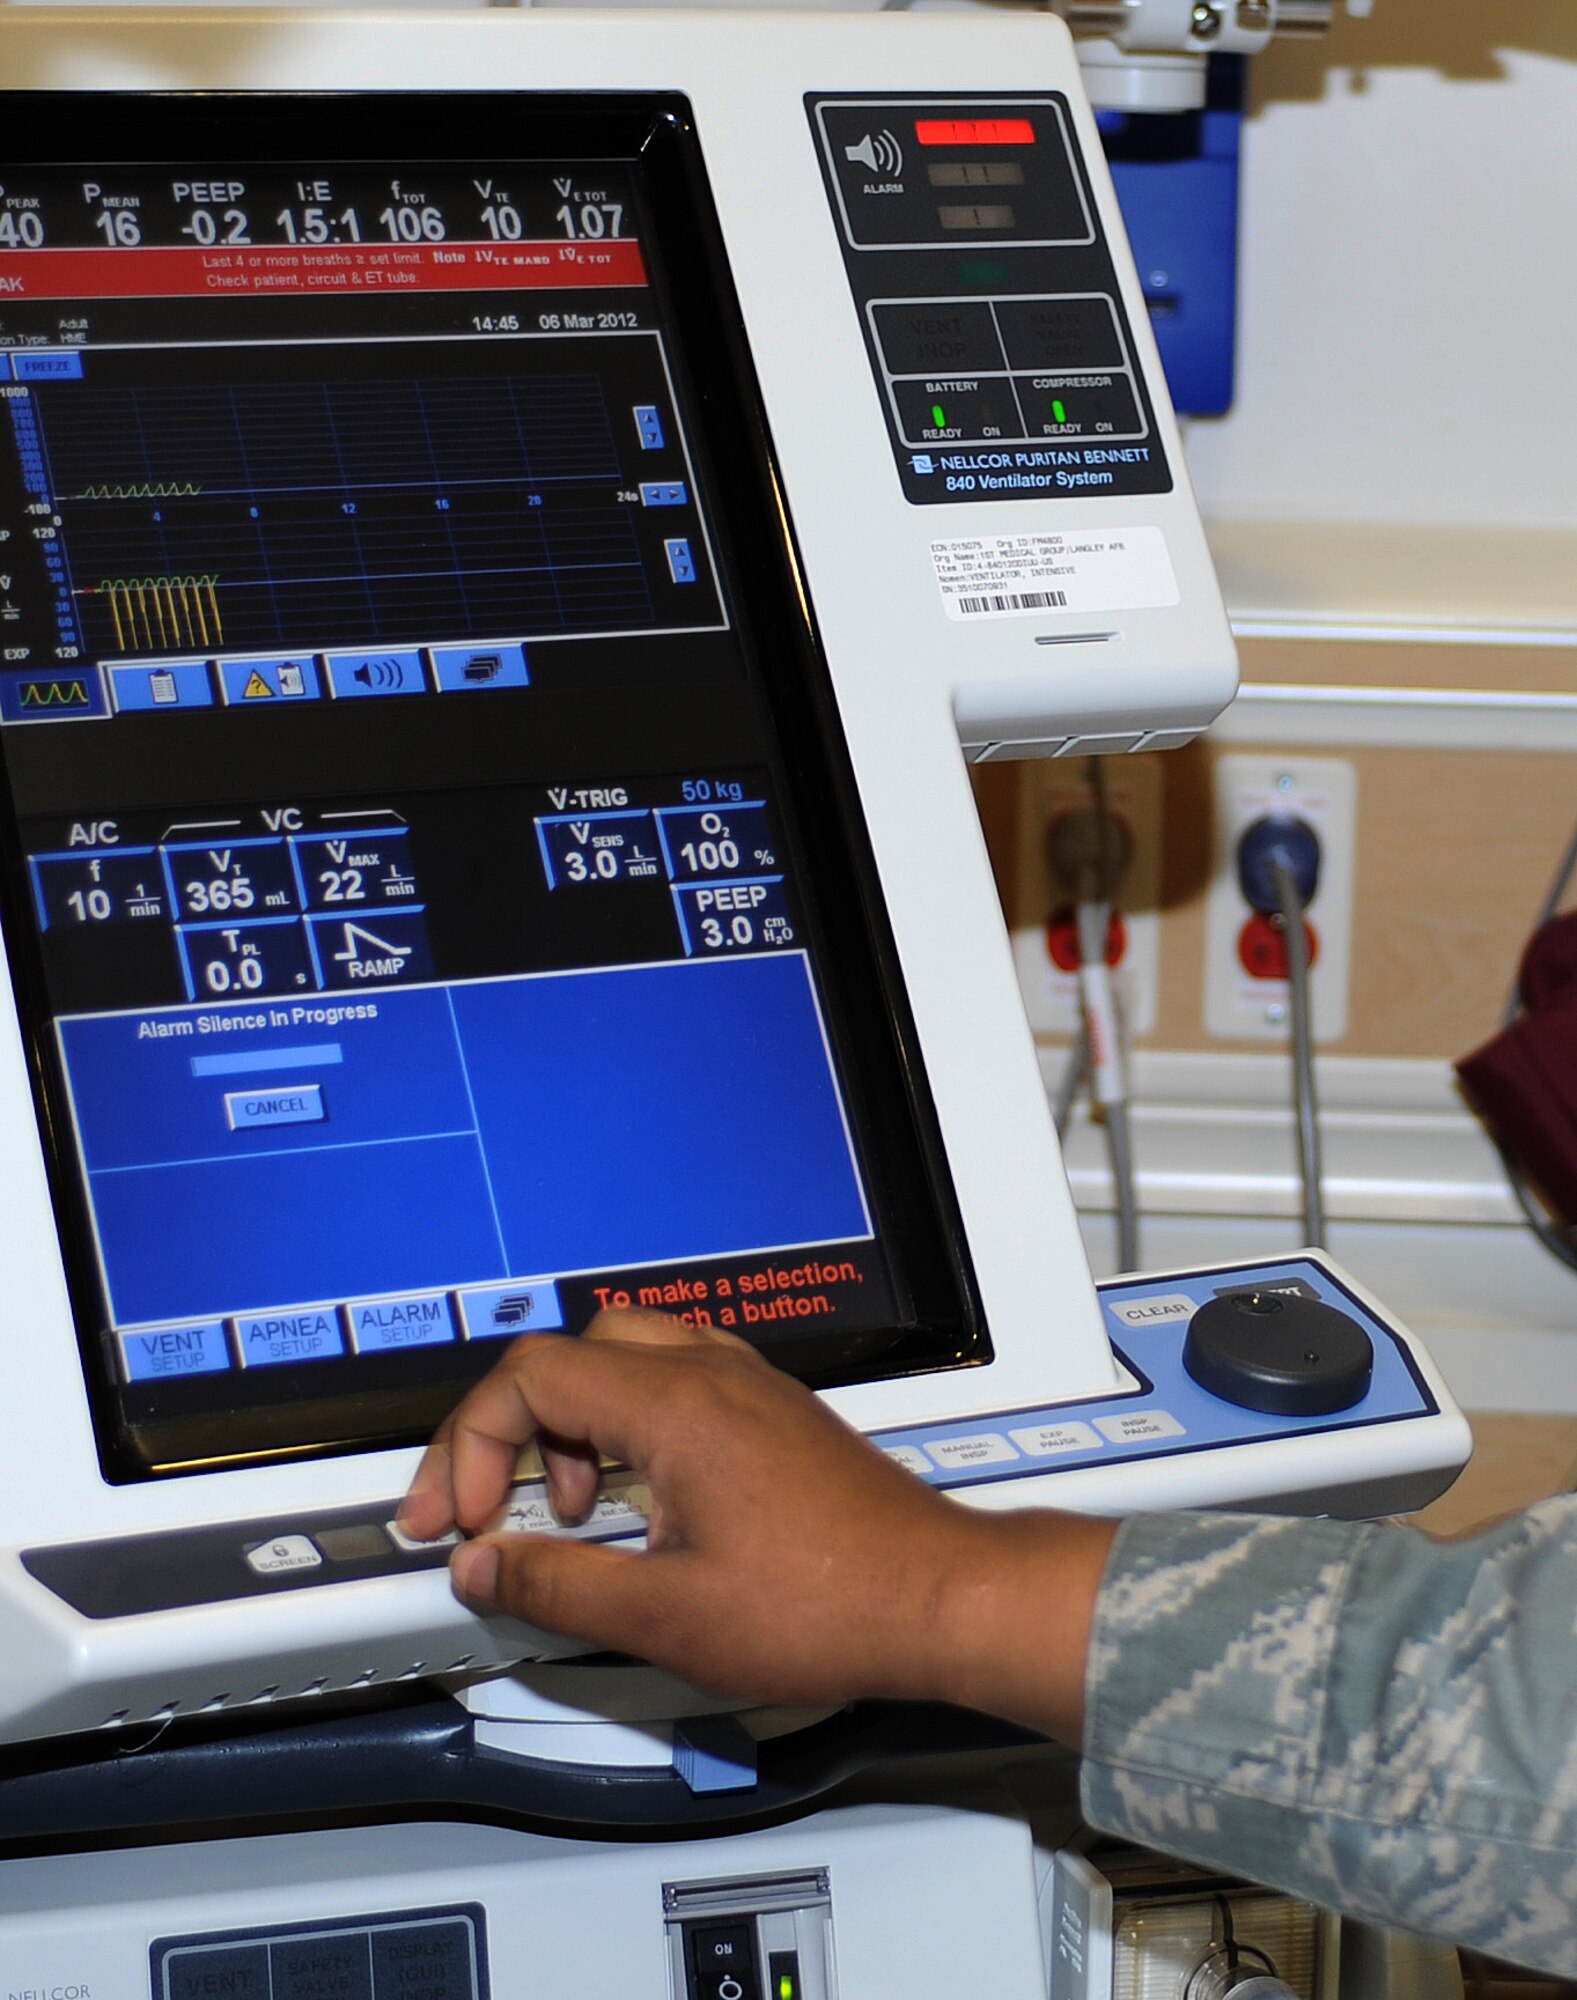 U.S. Air Force Senior Airman Destini Oglesby, 633rd Medical Operations Squadron Pulmonary Clinic lab technician, tests a ventilator at Langley Air Force Base, Va., March 6, 2012. Pulmonary specialists at USAF Hospital Langley use ventilators to assist patients who have difficulty breathing on their own while under intensive care. (U.S. Air Force photo by Airman 1st Class Teresa Cleveland/Released)